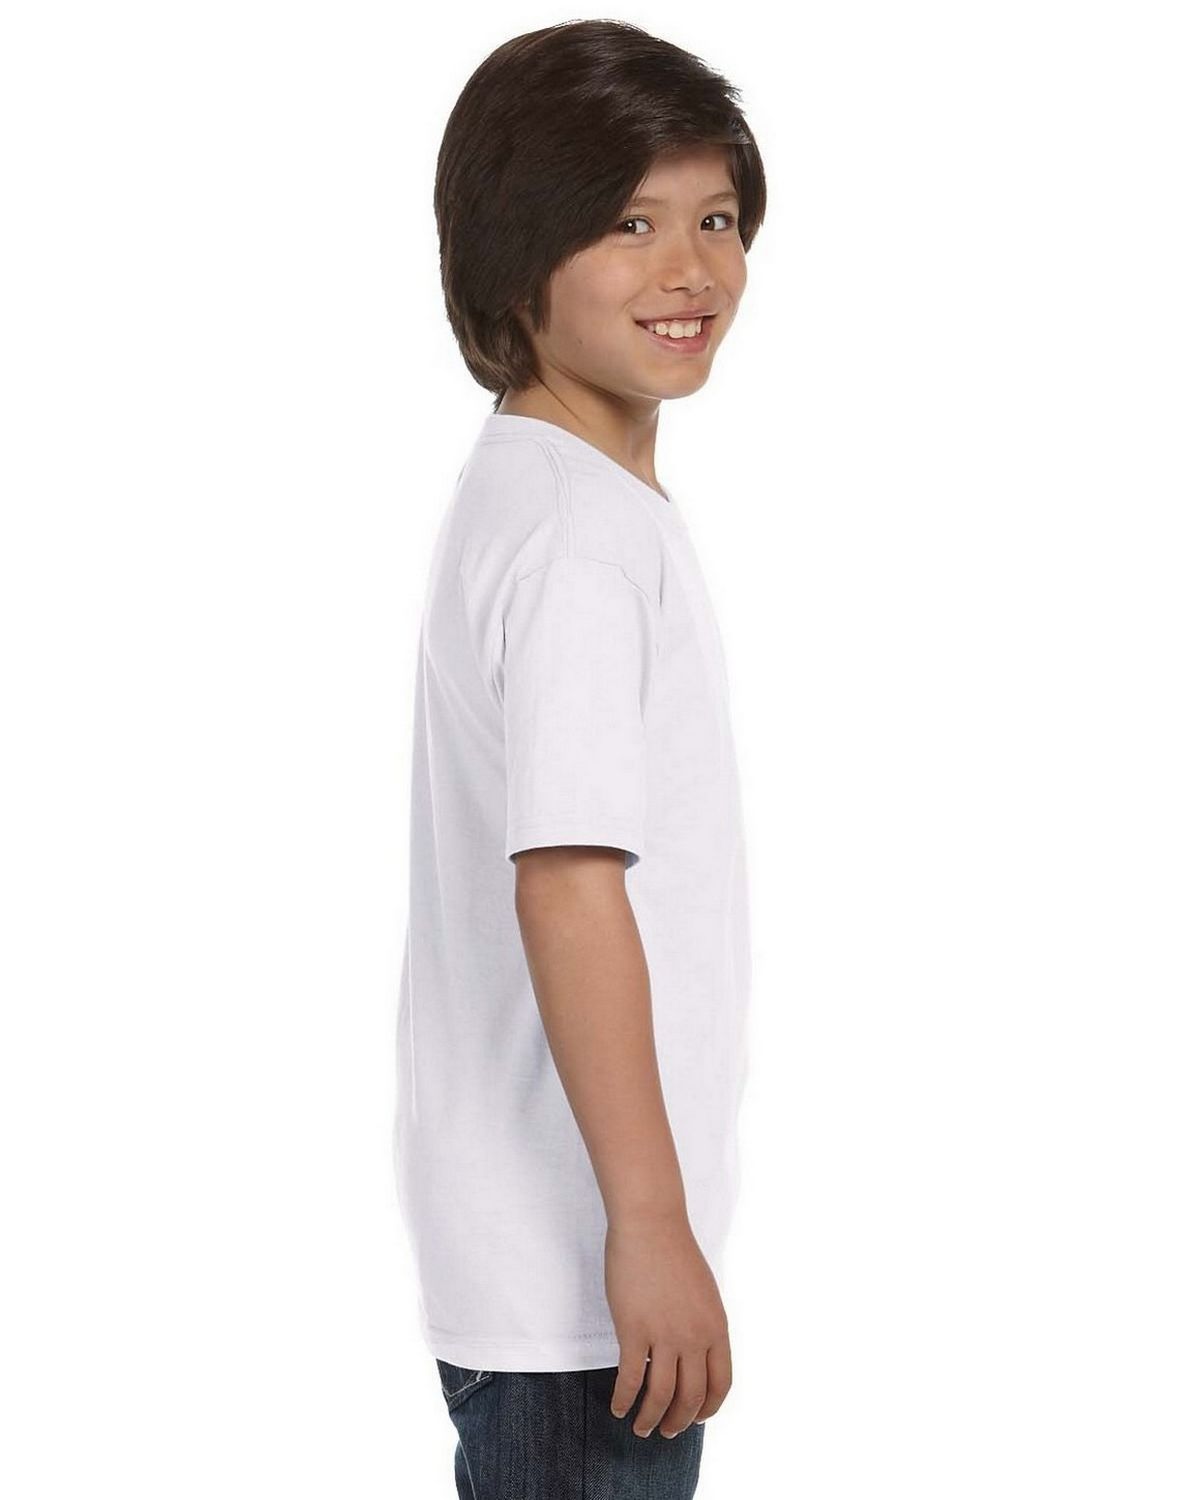 Size Chart for Hanes 5480 Youth ComfortSoft Cotton T-Shirt